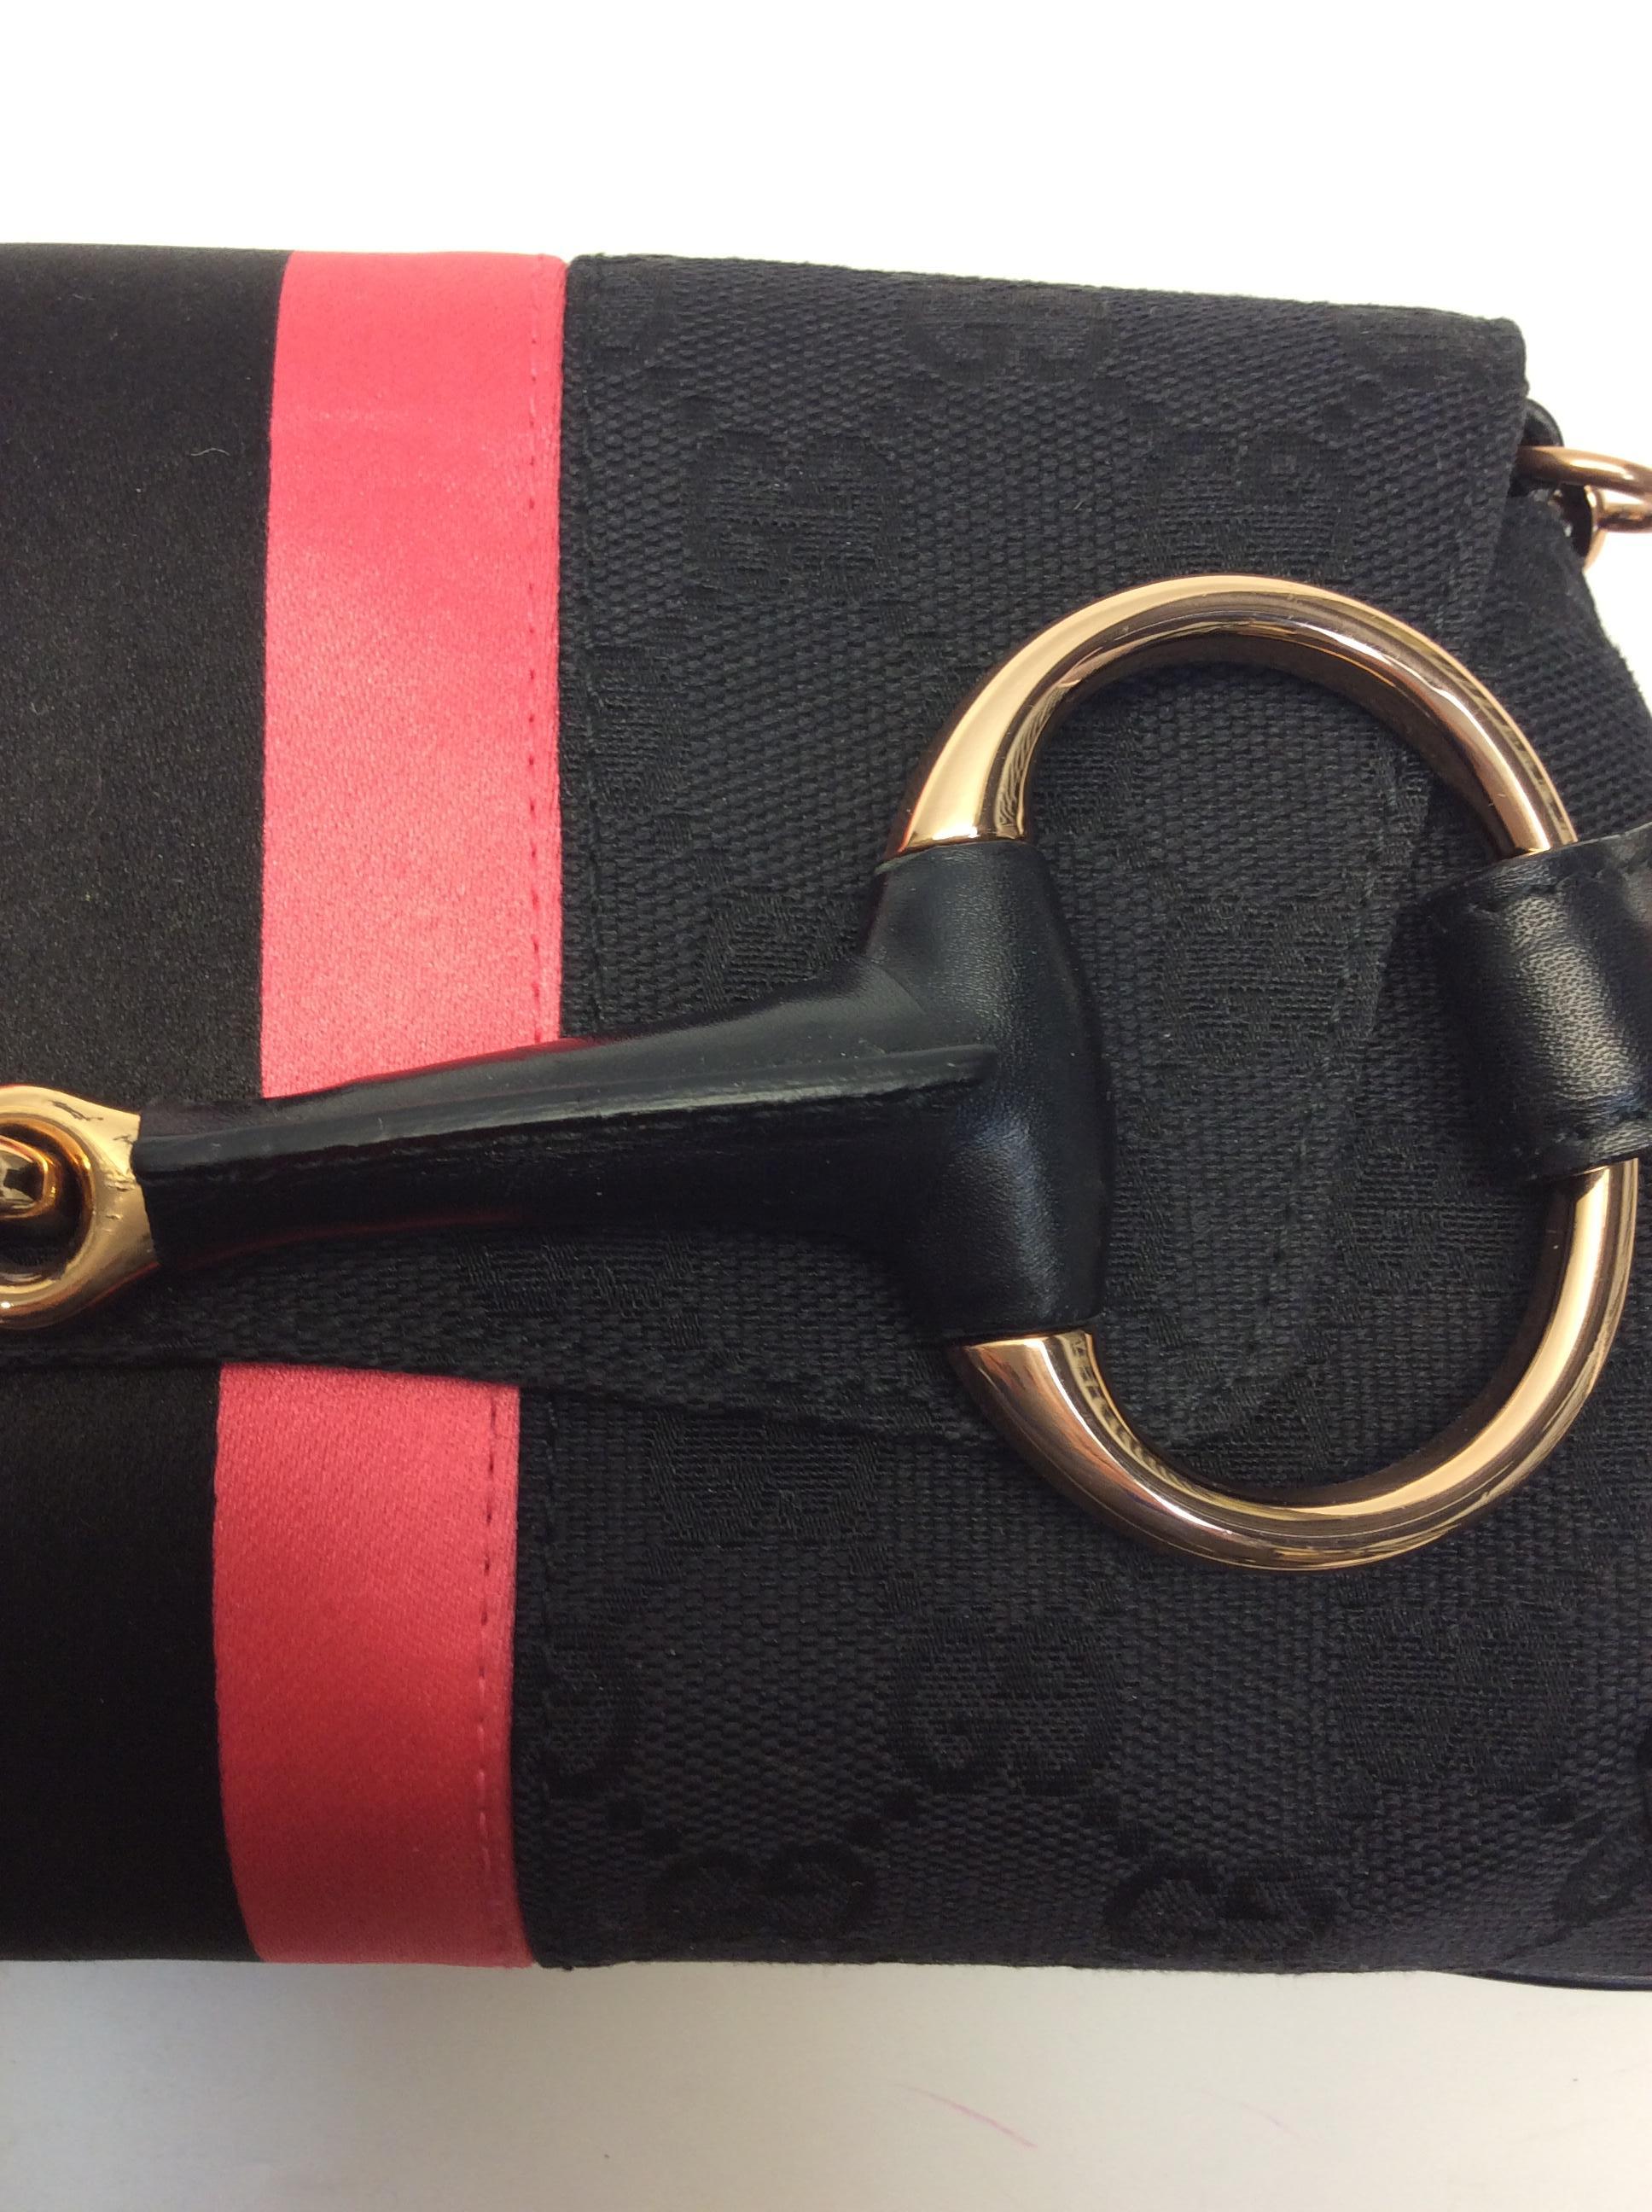 Gucci Black with Pink Stripes Small Shoulder Bag For Sale 2